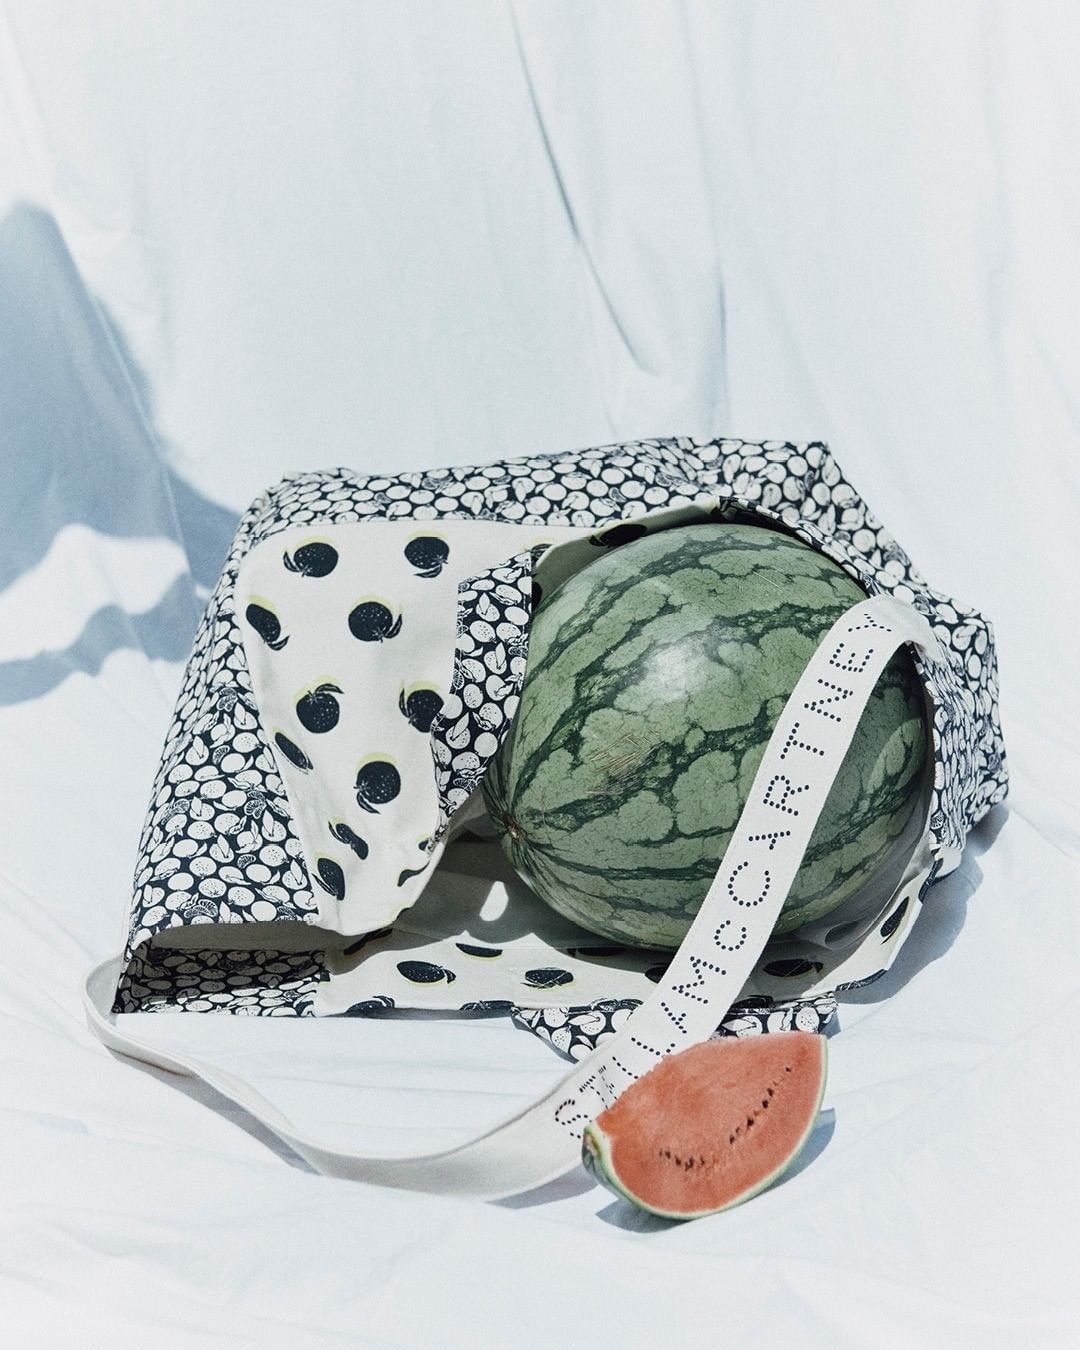 Stella McCartney - “Eating watermelon as your hair is dripping from the last sea swim, the mesmerising music of the waves.” – Melanie + Ramon⁣
⁣
Our new season swim accessories dive into the dreamy fa...